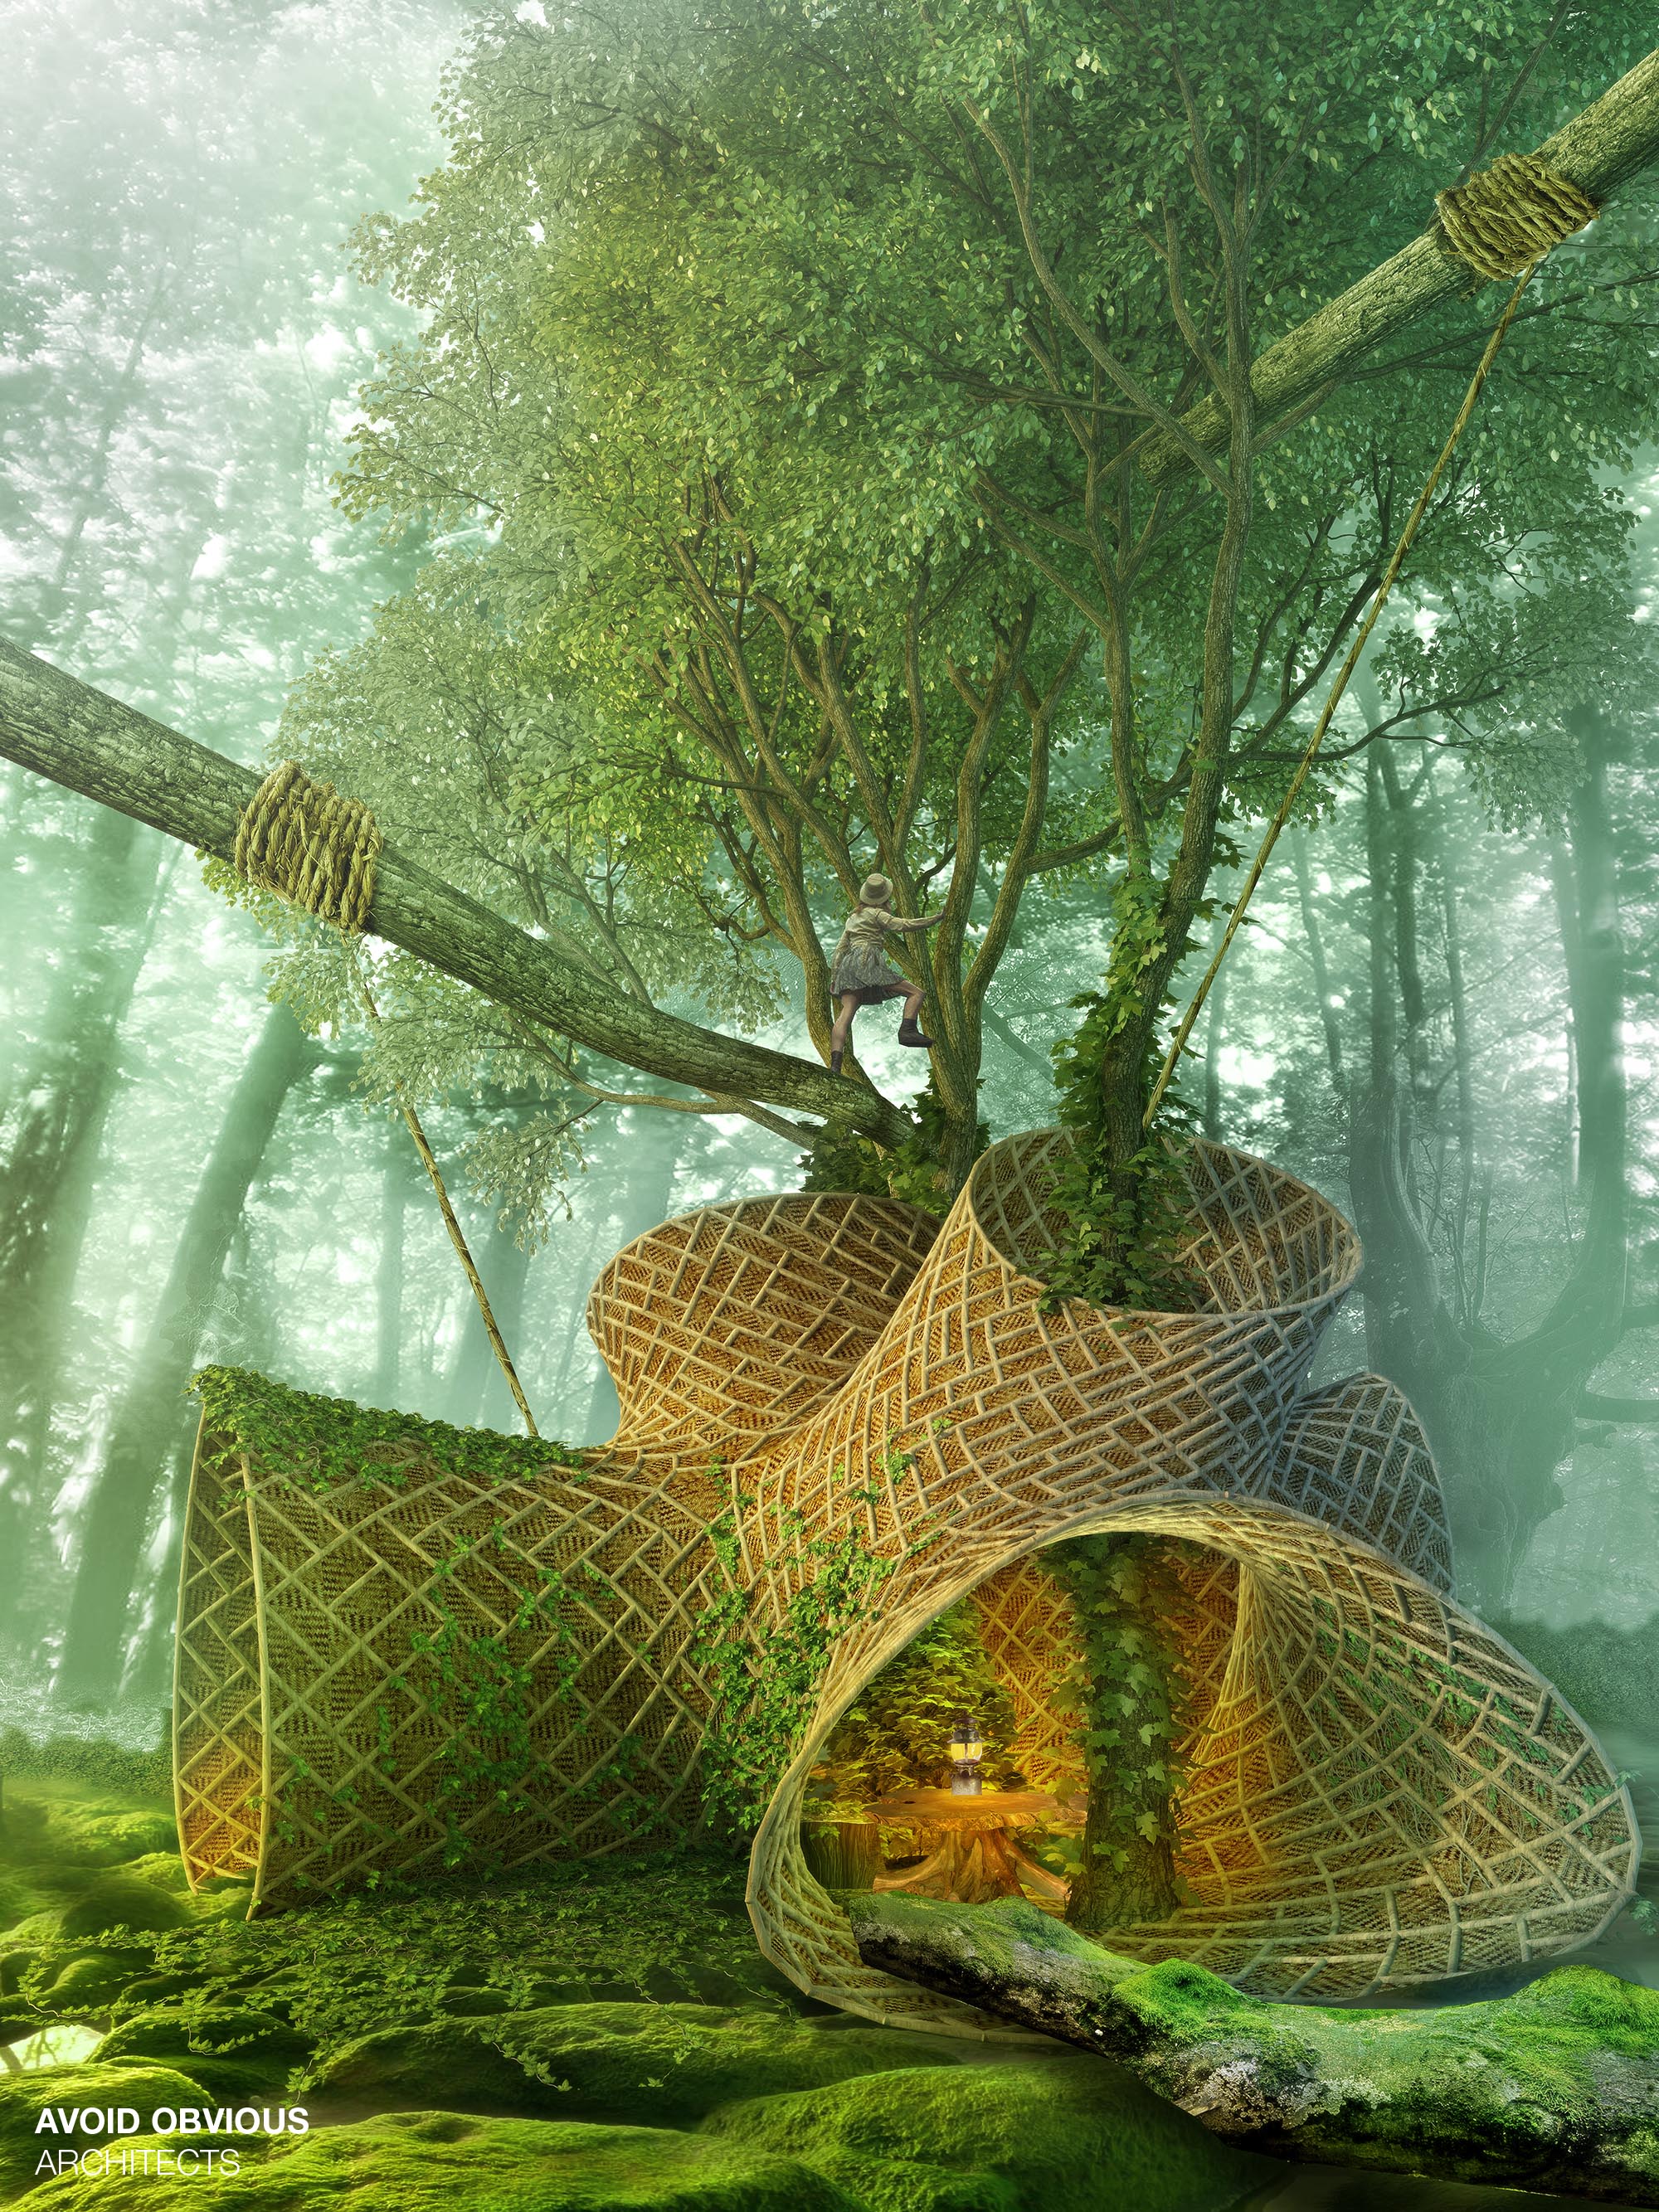 sustainable, architecture, life cycle, material, smart, living, organism, coffee, 3d printing, avoid obvious, masterplan, green, futuristic, ecological, future, bamboo, trees, plants, wood, nature, learning, center